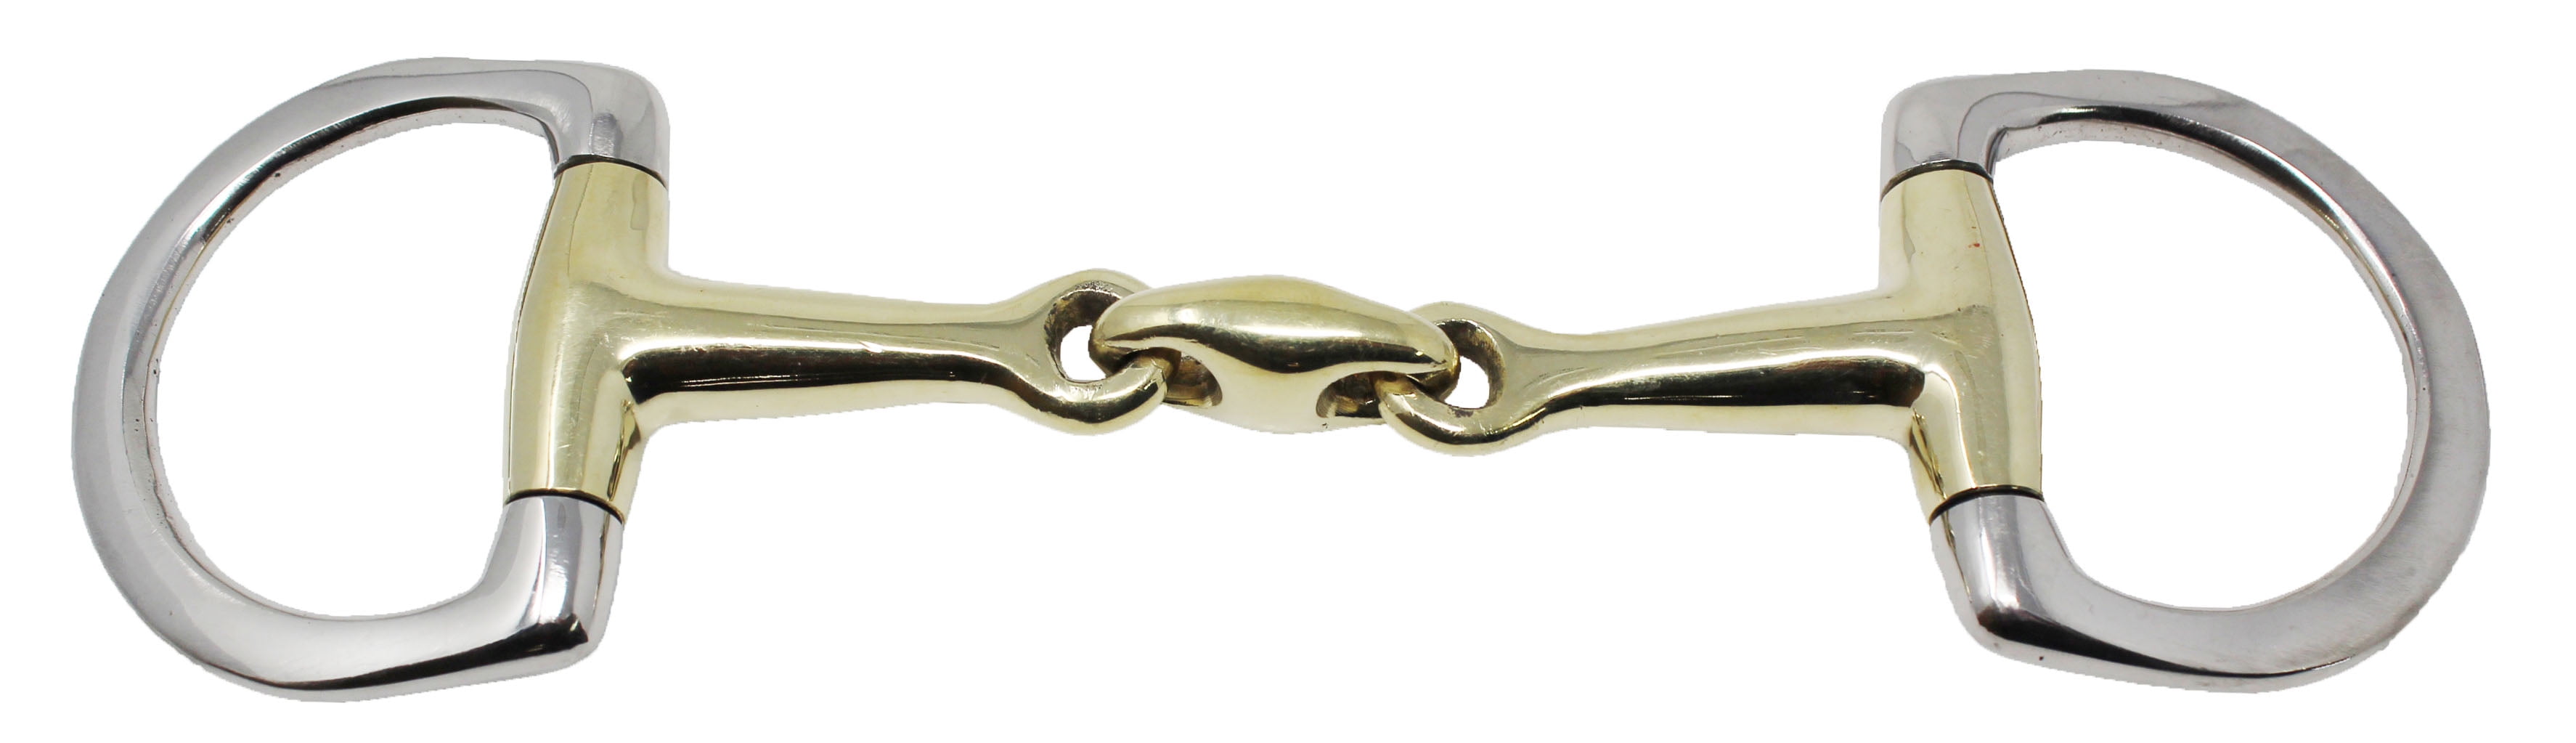 Professional Equine Horse 5 English Riding Copper Eggbutt Double Jointed Snaffle Bit 35506